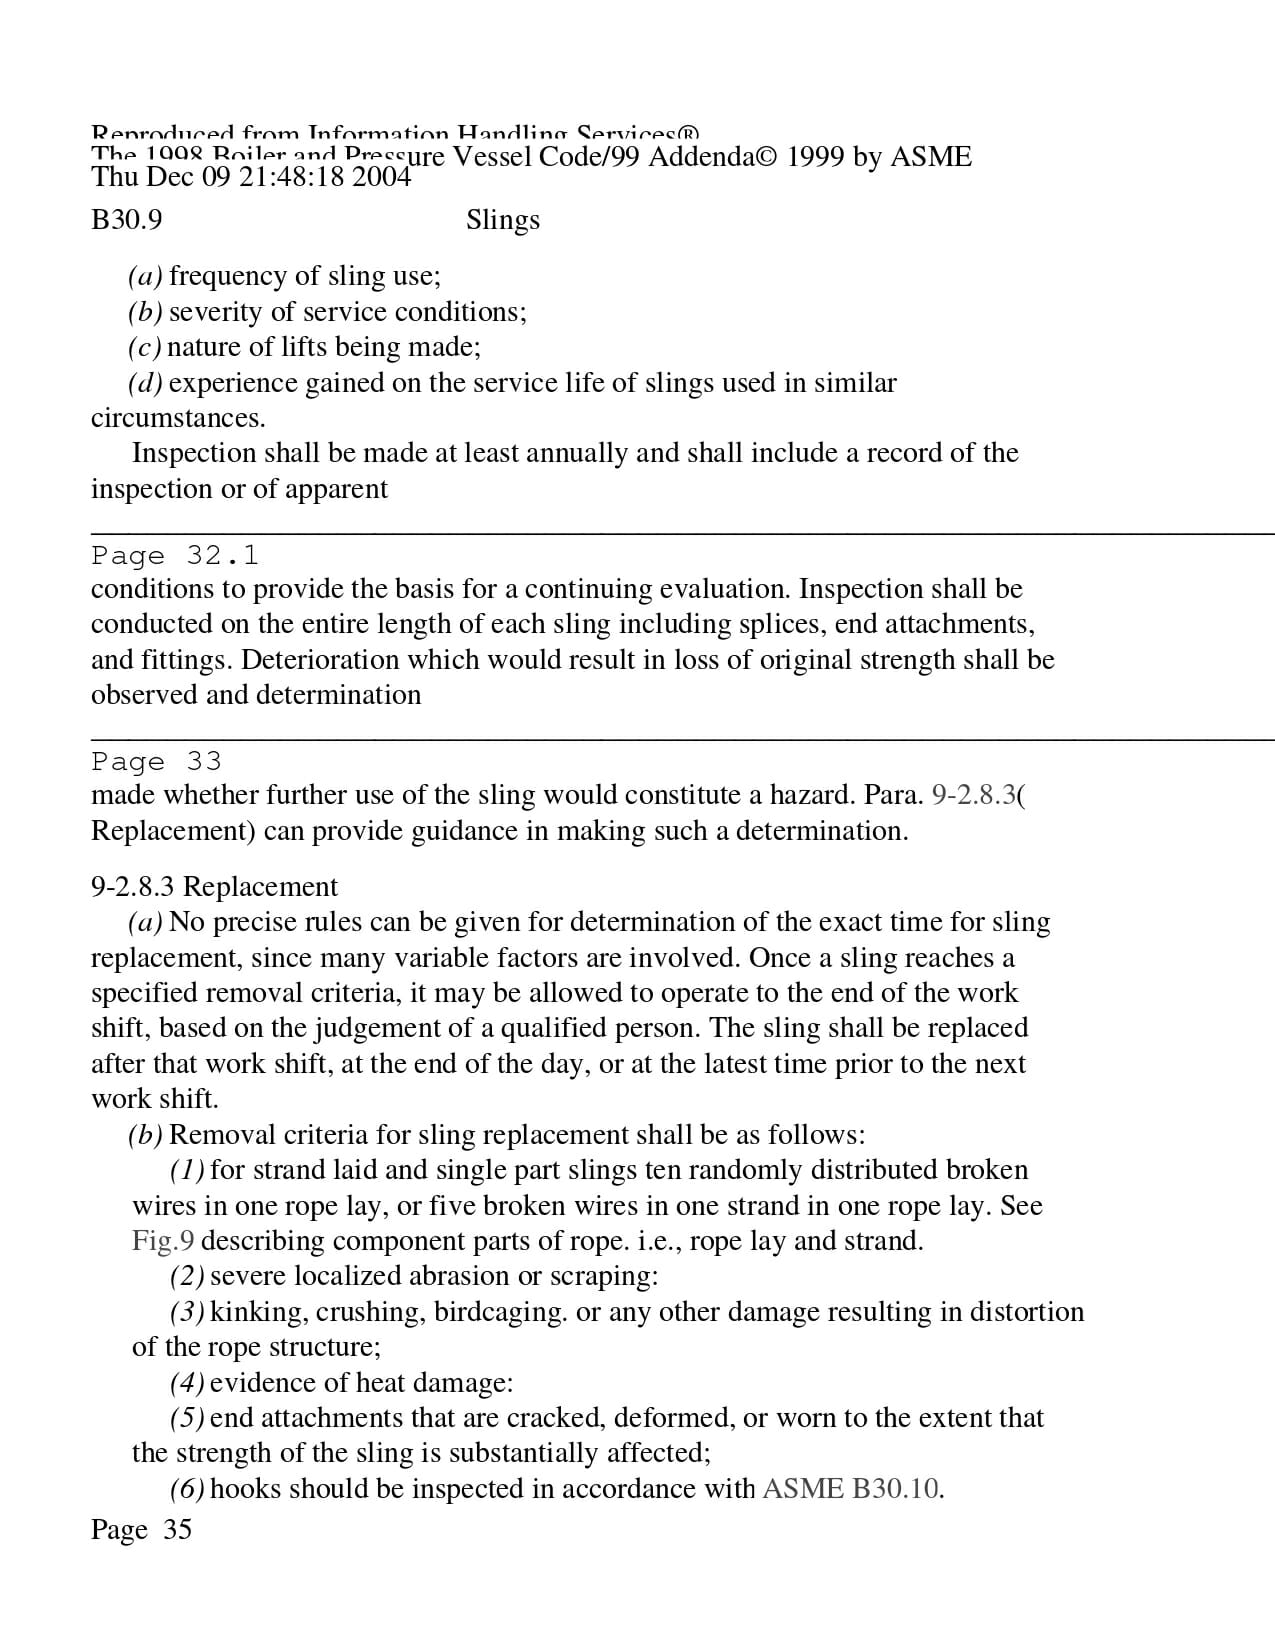 vdocument.in_asme-b309_page-0035